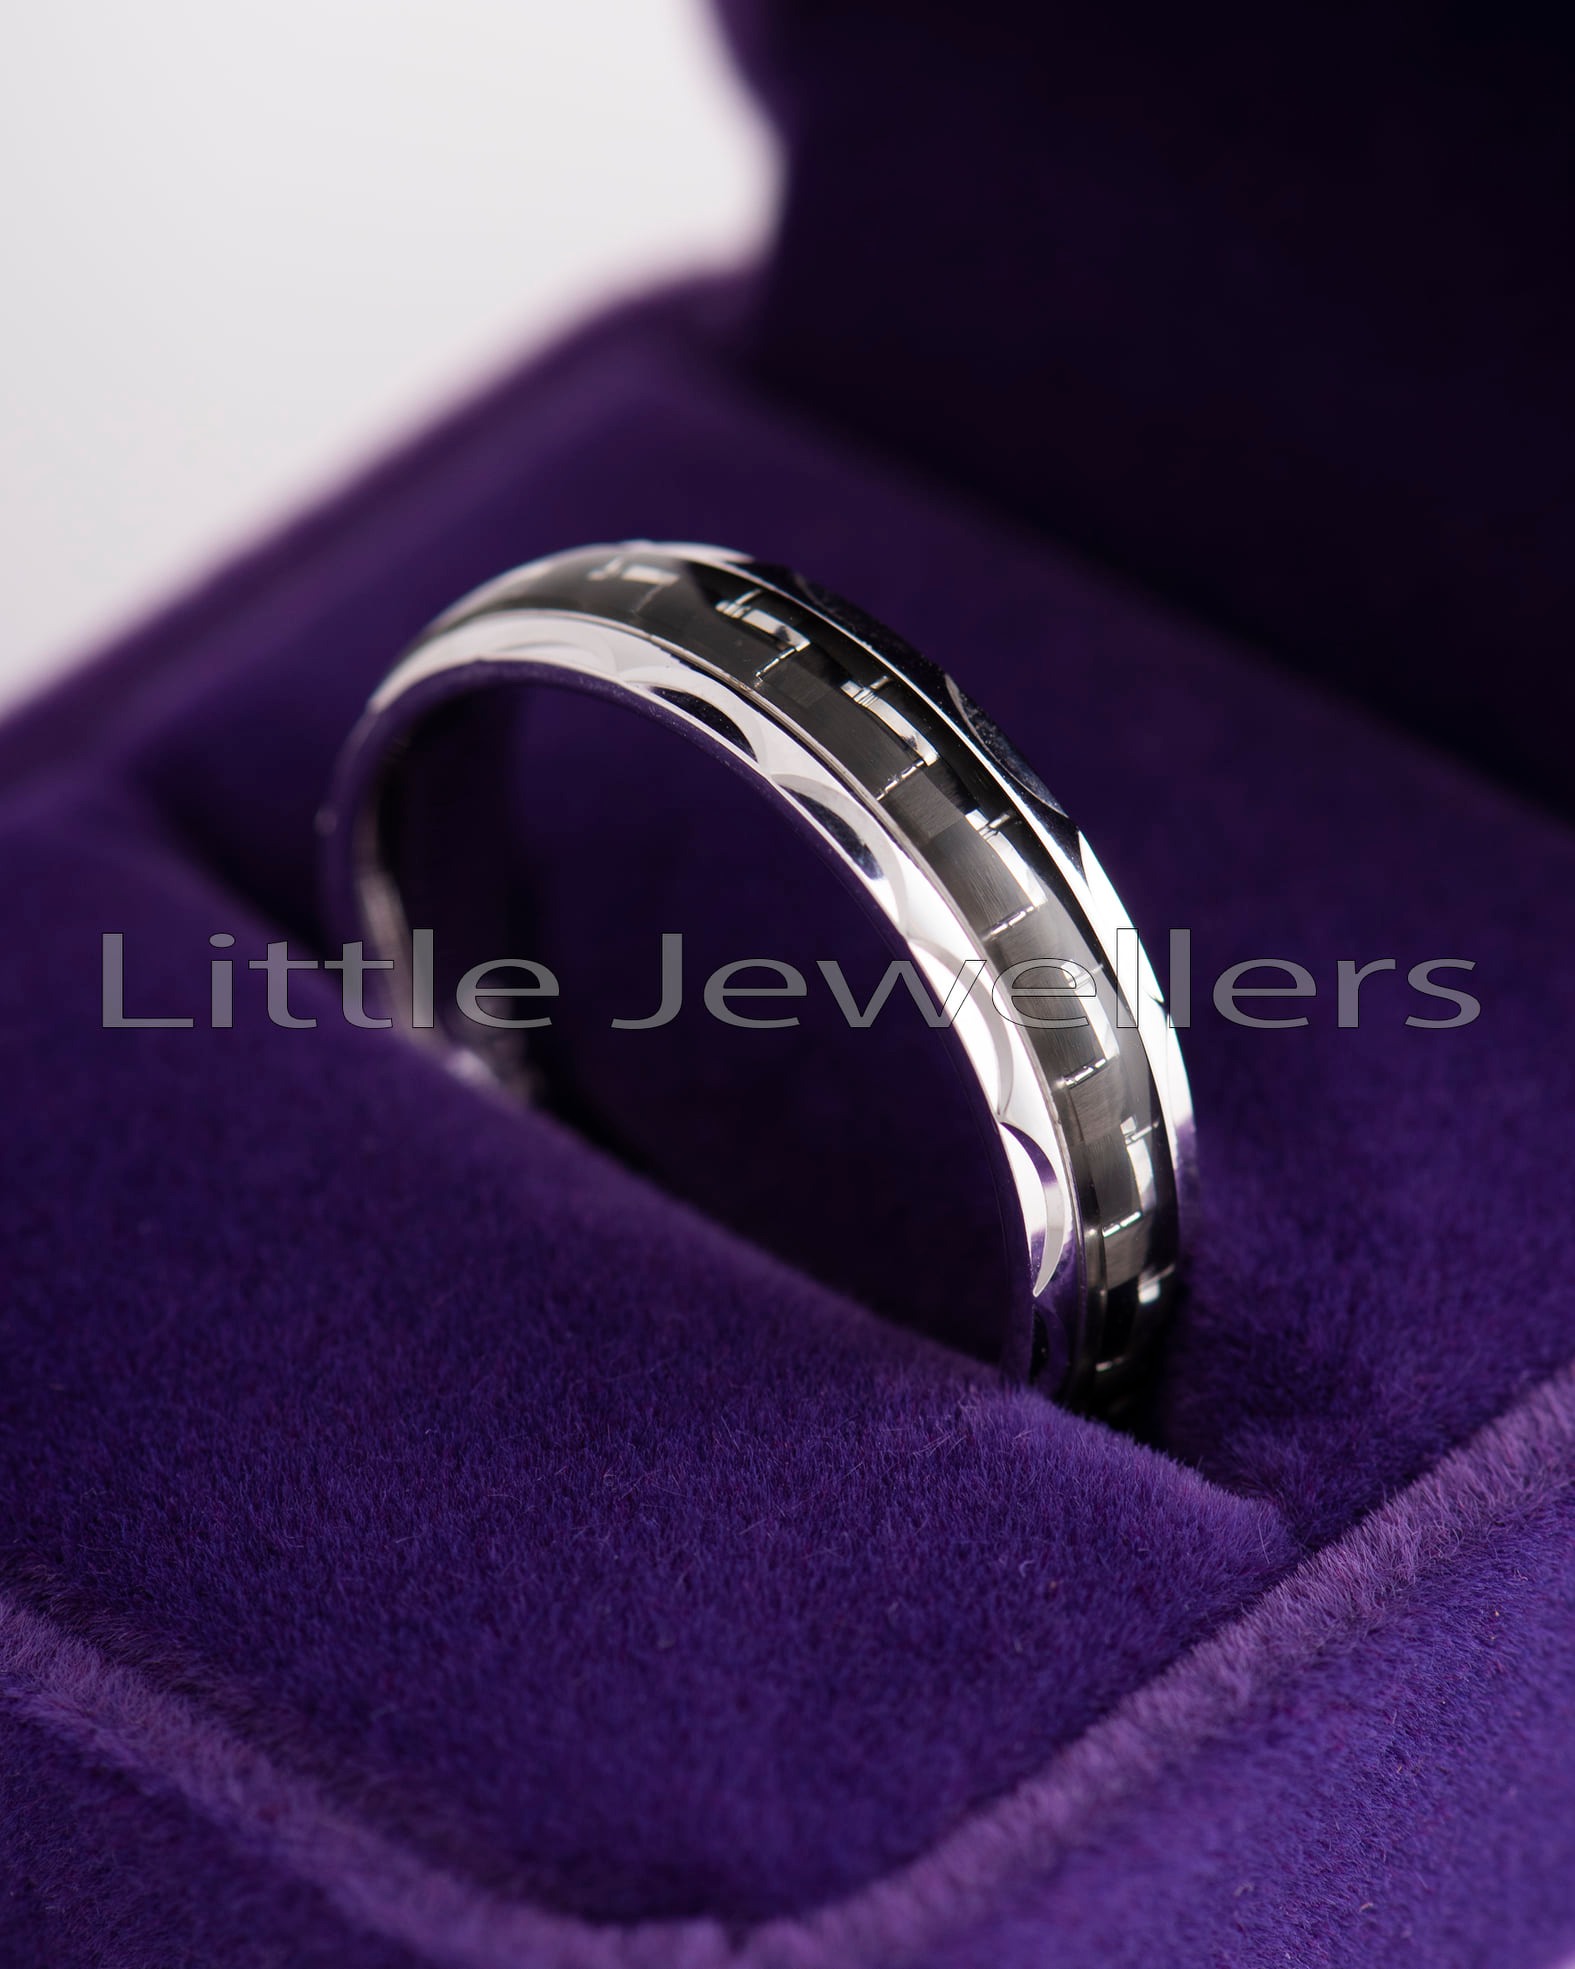 An Elegant And Sophisticated look Is What you get From This Sterling Silver Men's Rings.